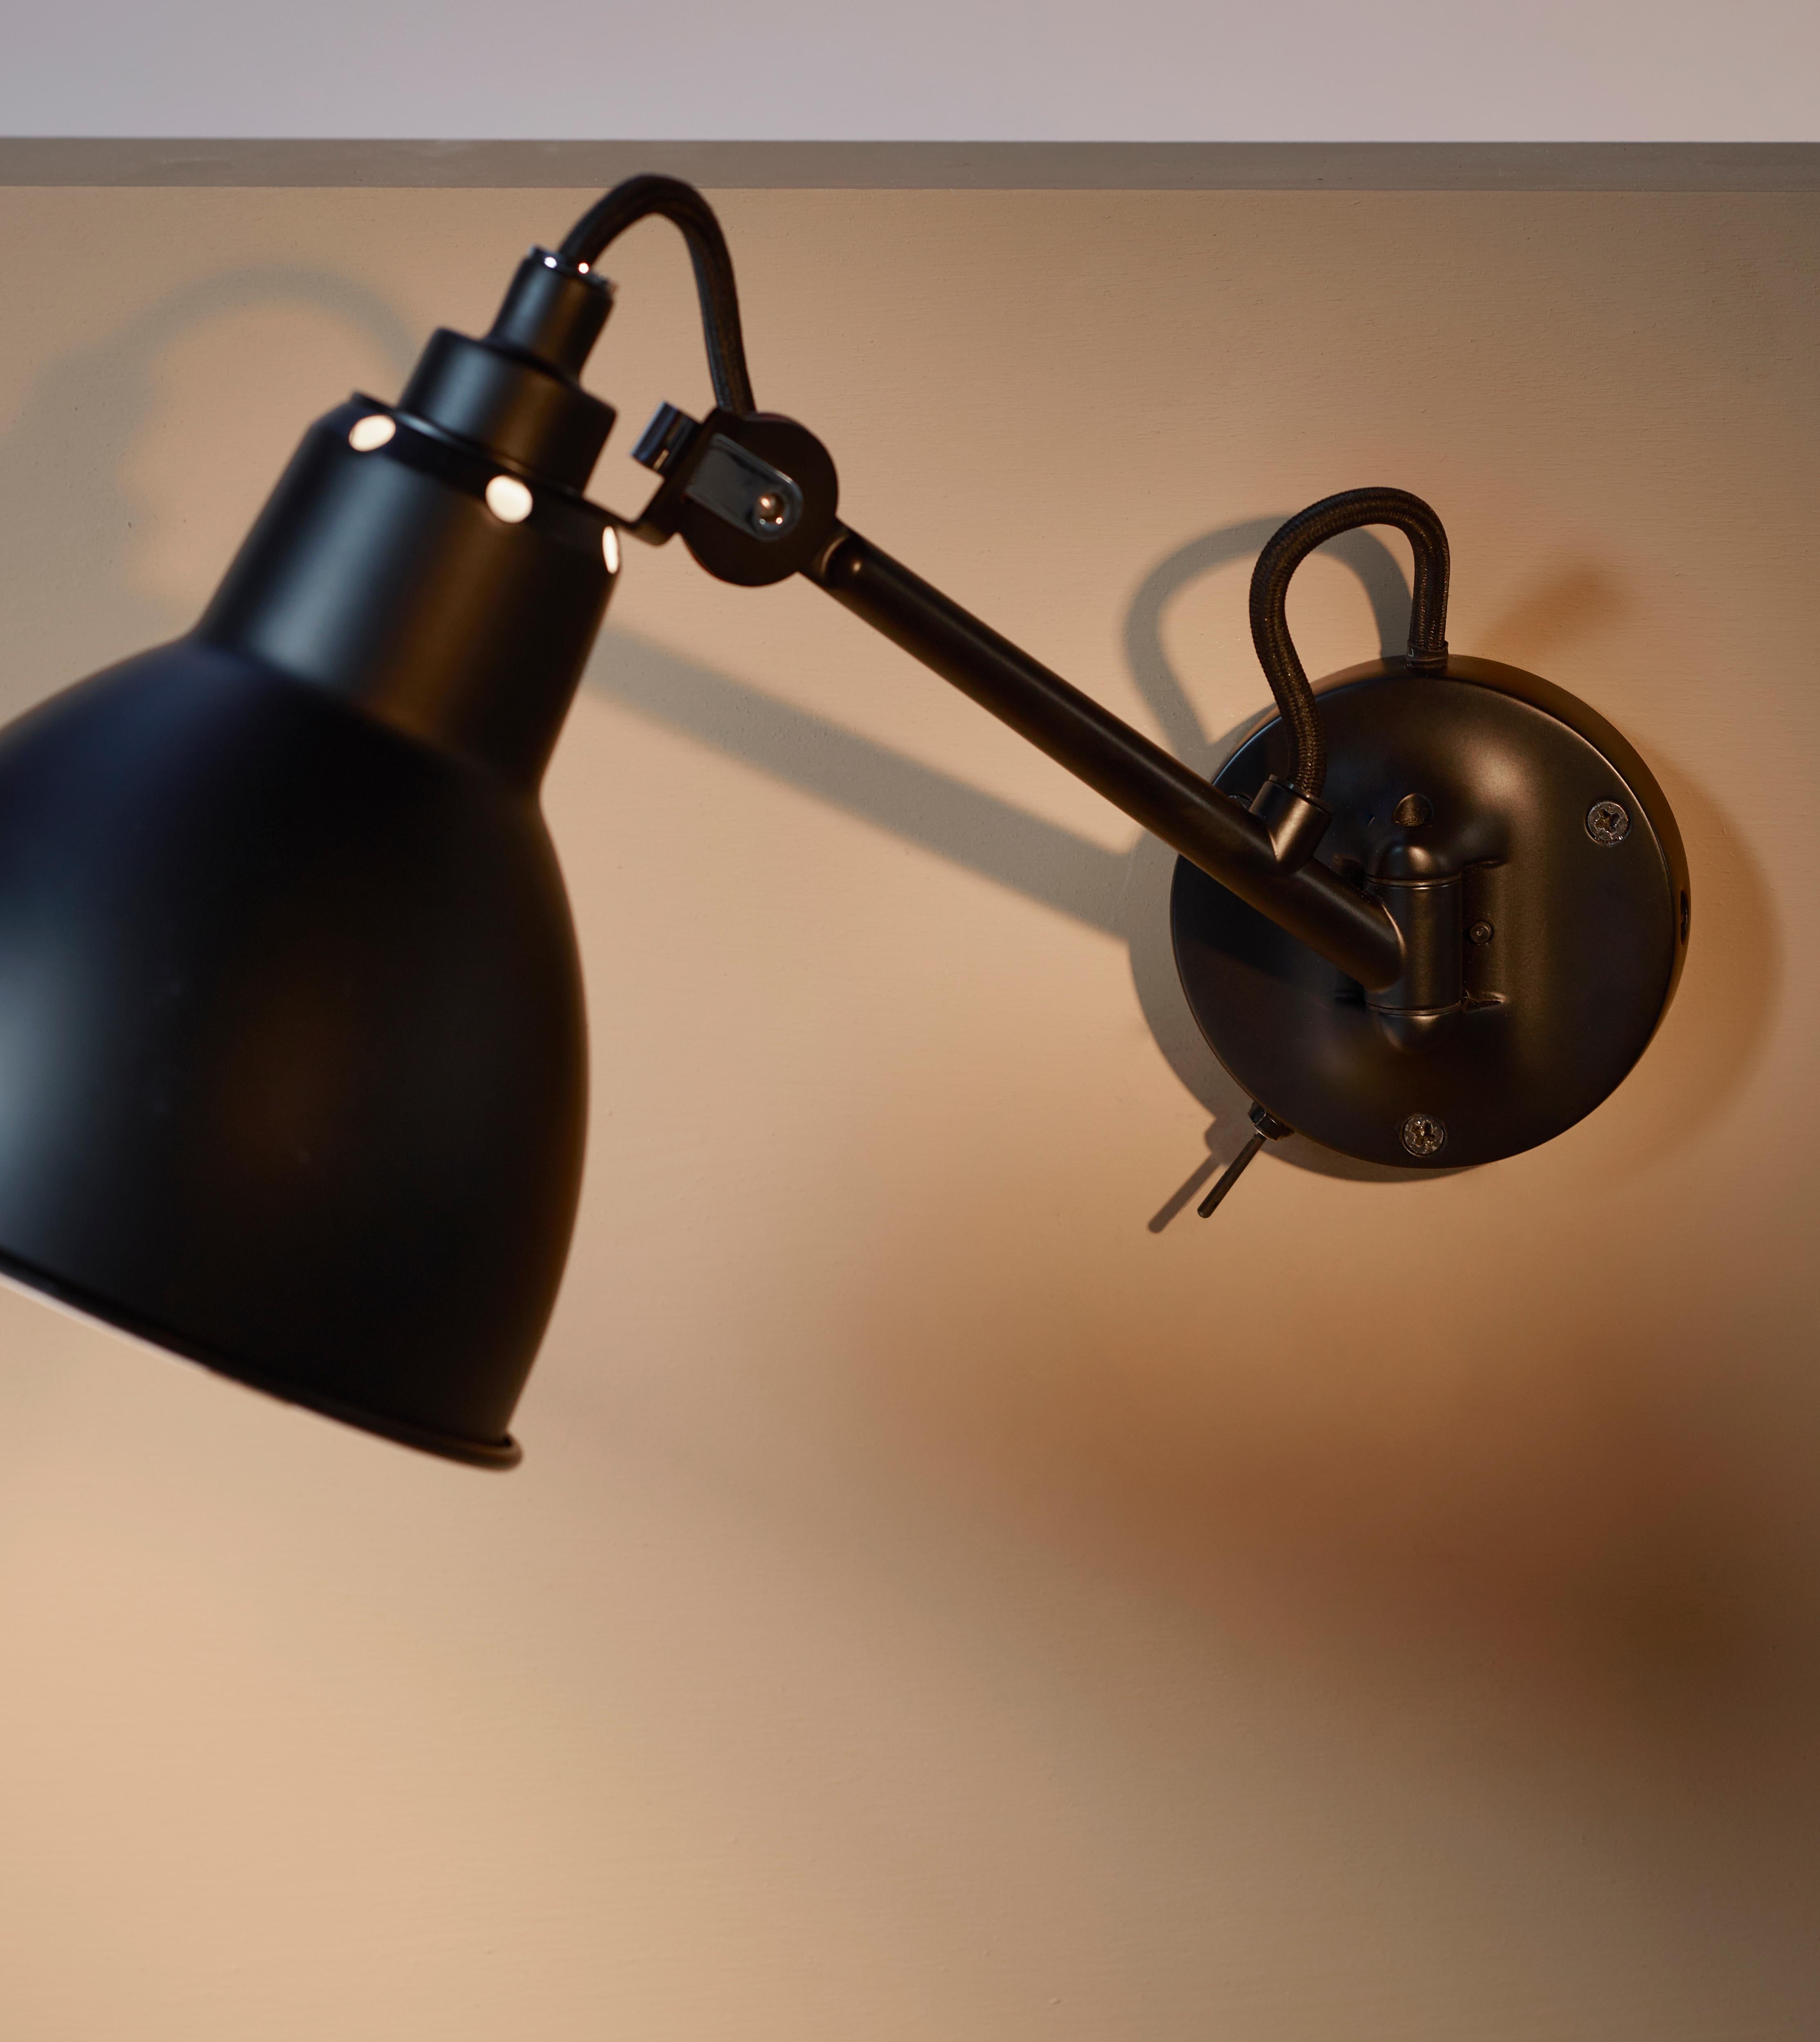 DCW Editions La Lampe Gras N°104 SW Wall Lamp in Black Steel Arm and Polycarbonate Shade by Bernard-Albin Gras
 
 In 1921 Bernard-Albin GRAS designed a series of lamps for use in offices and in industrial environments. The GRAS lamp, as it was